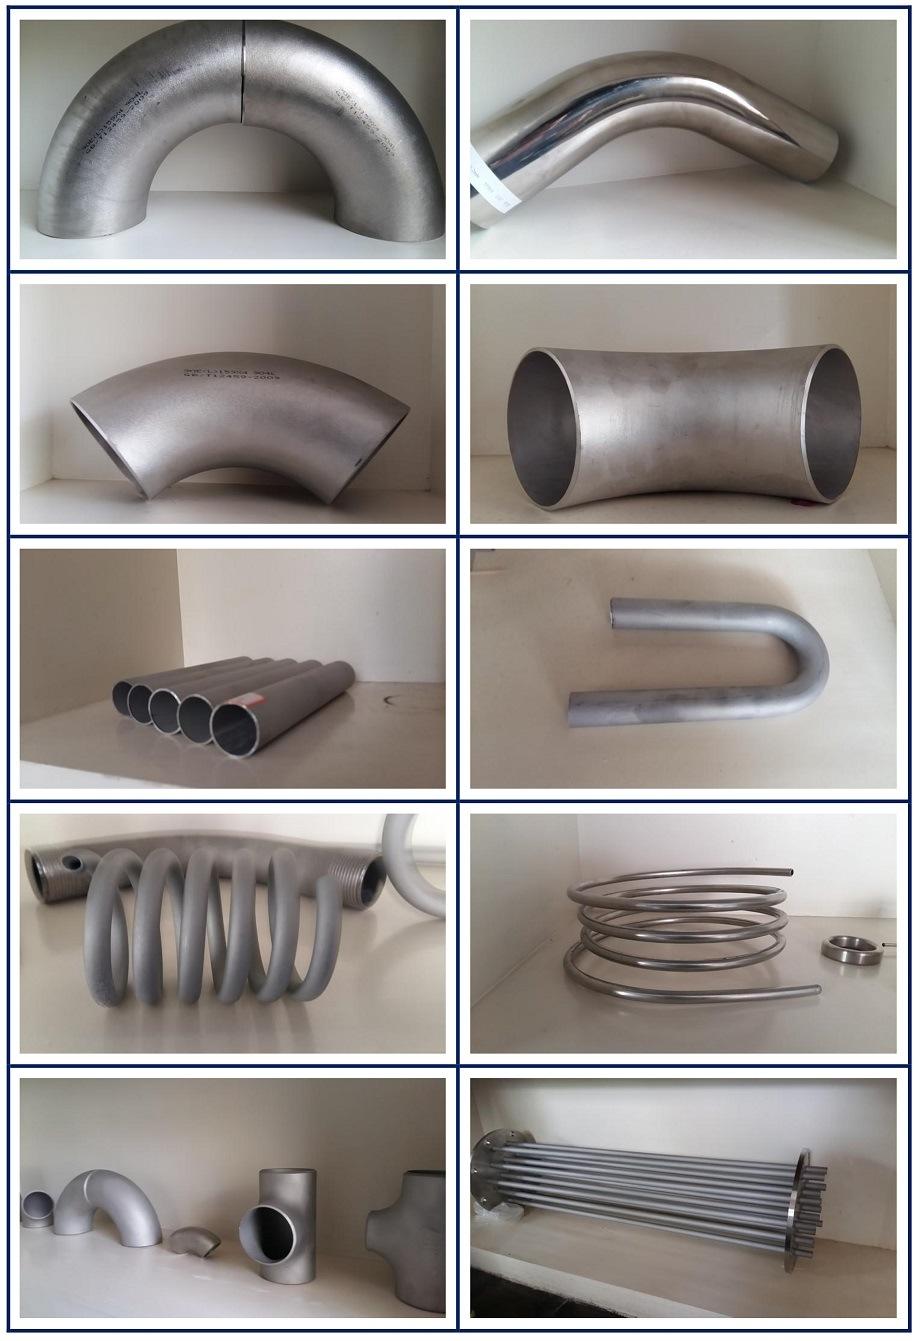 China Steel Fittings Price